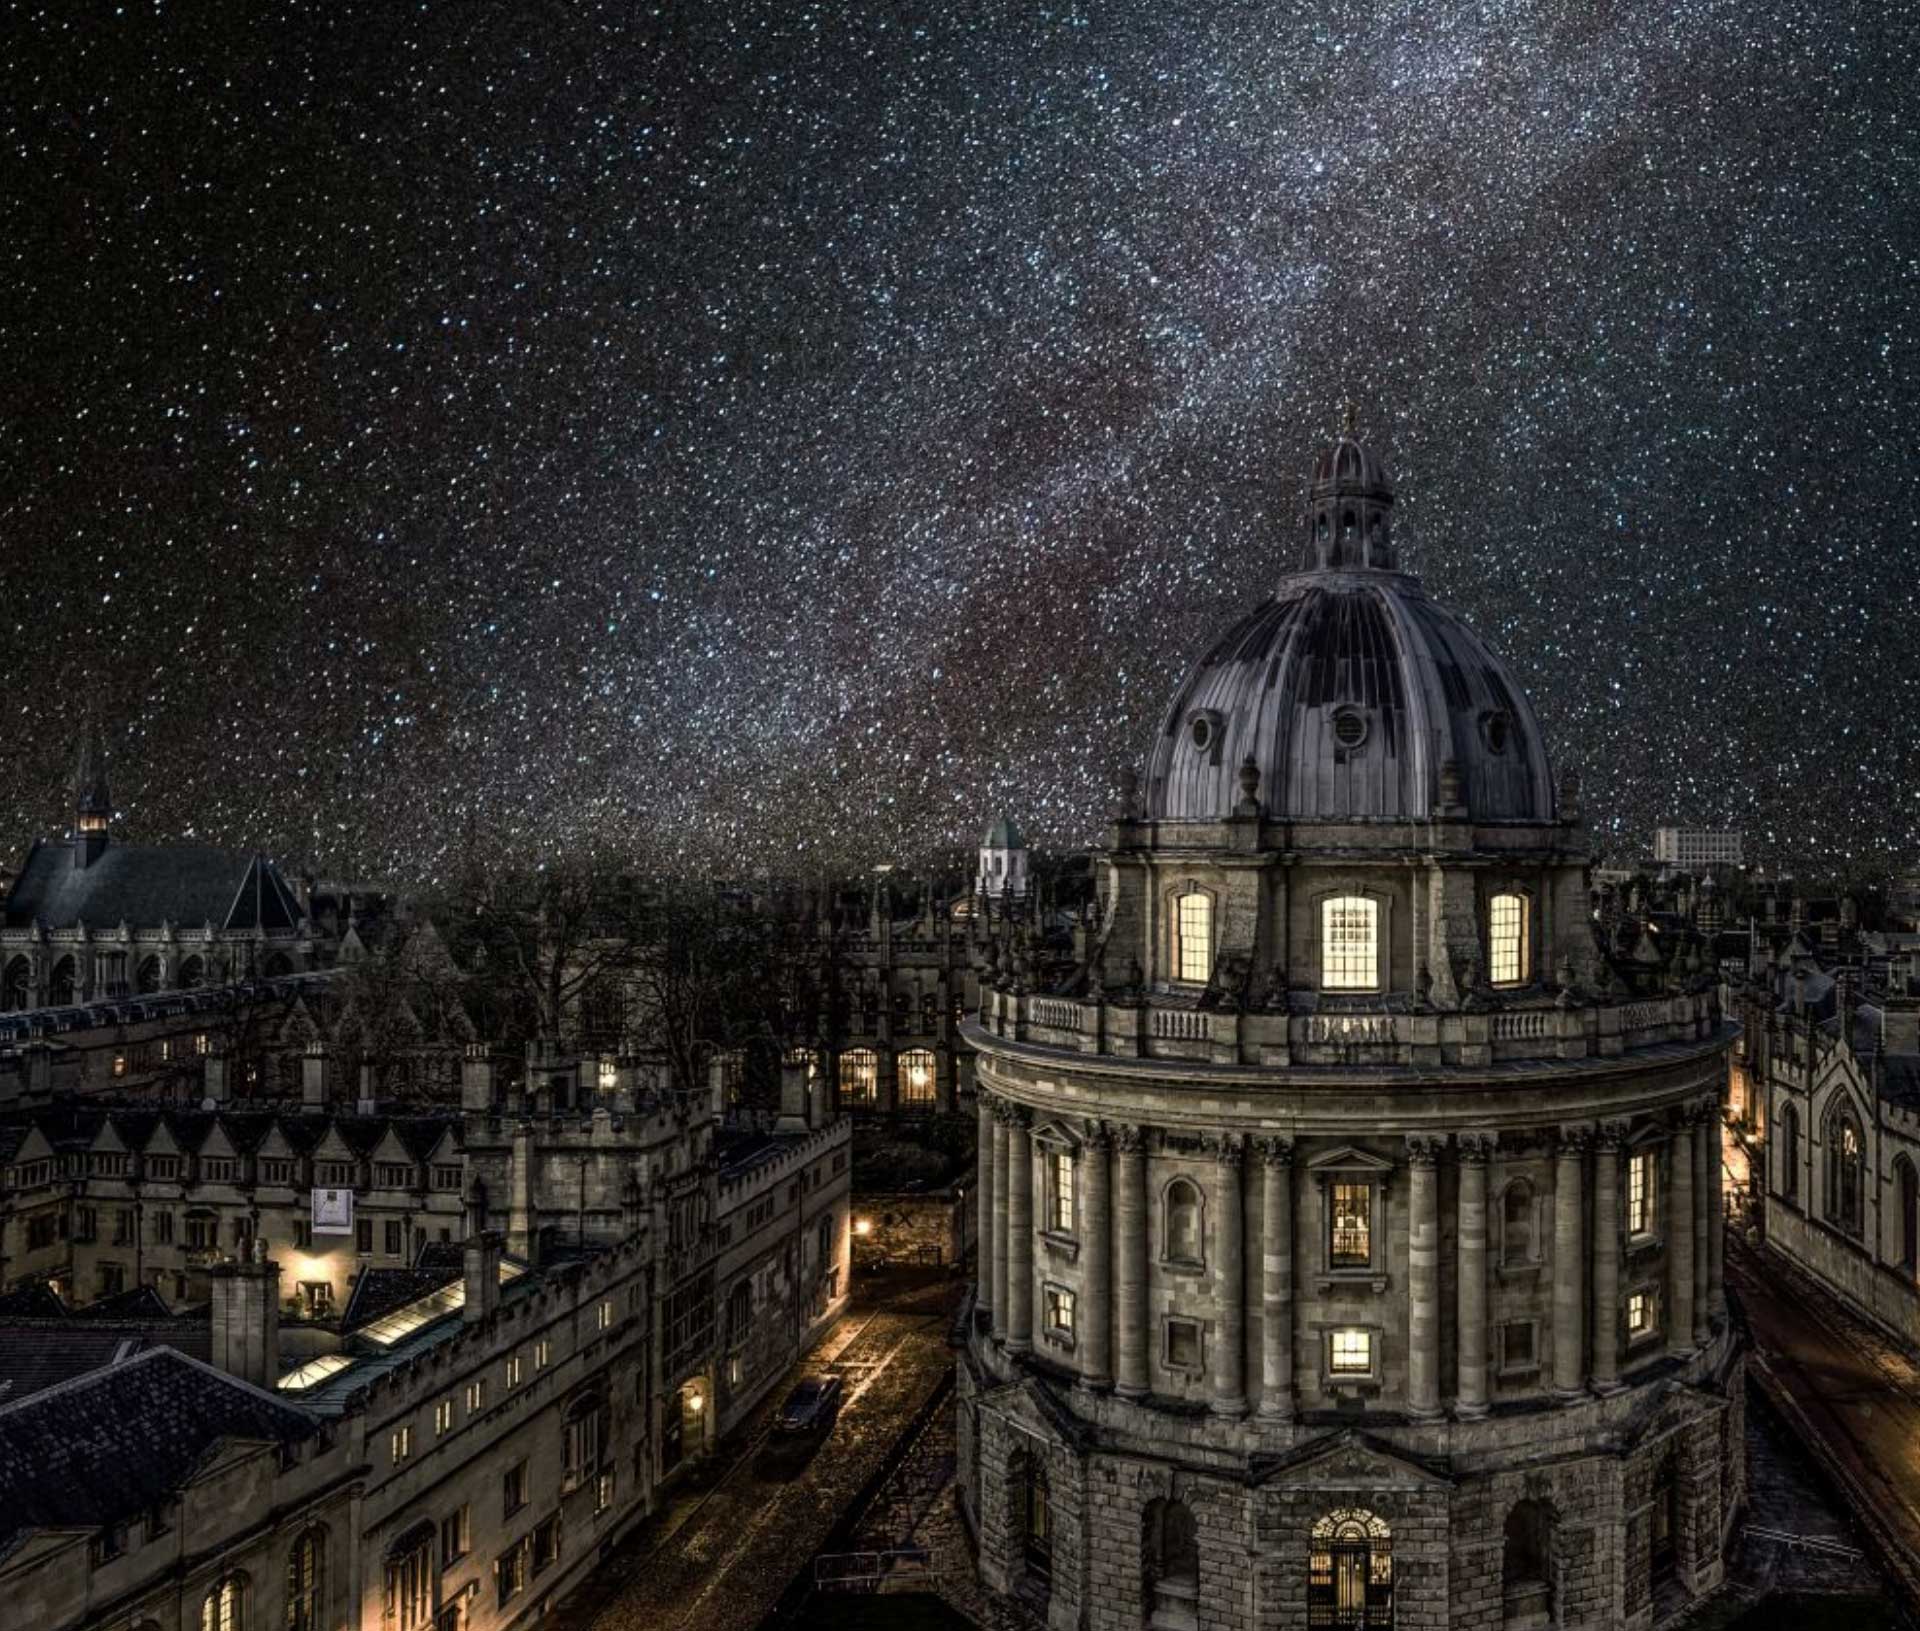 A night time view of Oxford's Radcliffe Camera beneath a starfield